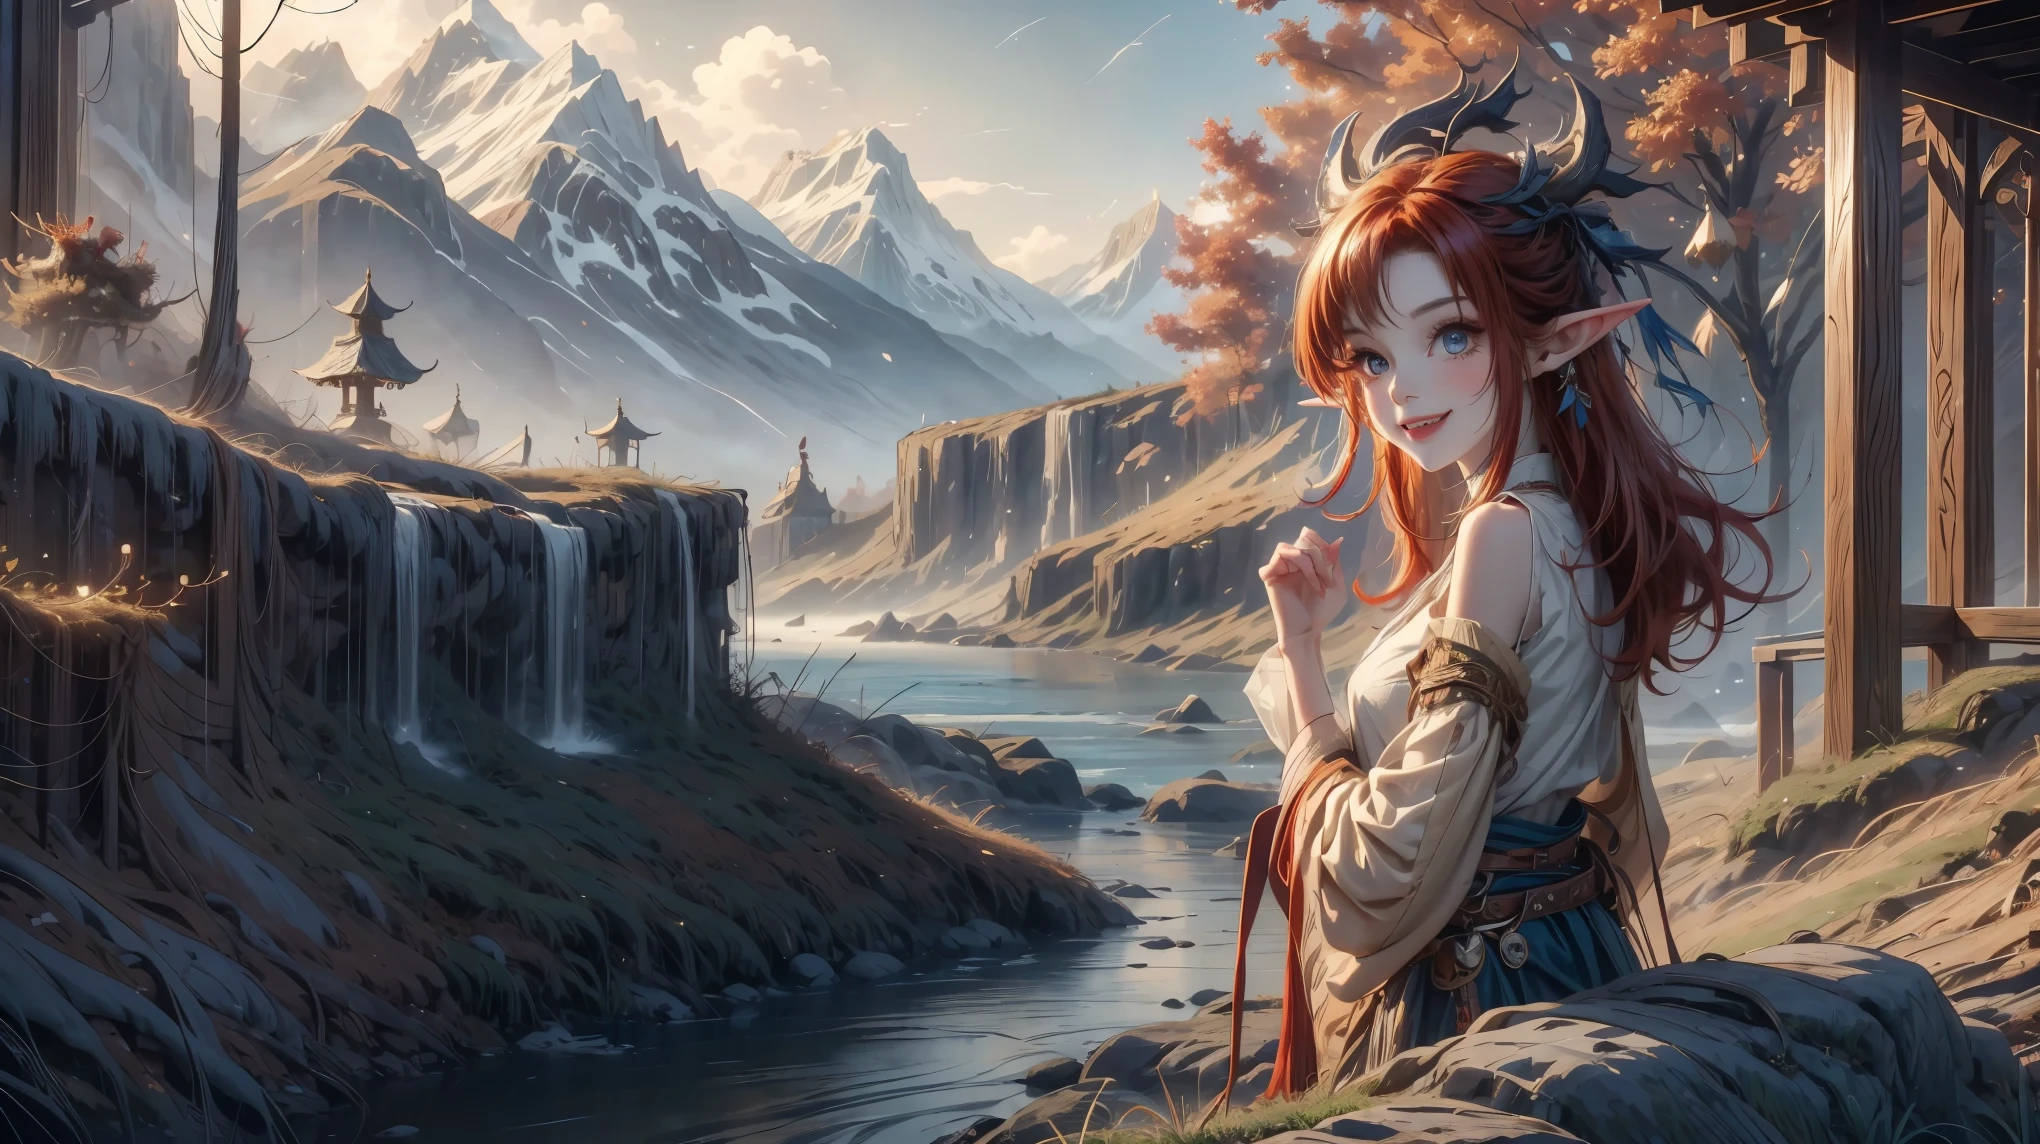 cowboy shot,elf ears, elf girl small waist, red hair , smiling, vintage clothing,fang teeth, background forest, mountain, river, mountains, trees, autumn , leaves scattered around , windy , blue flowers,sky clouds , sunrise, vivid colors, vibrant colors